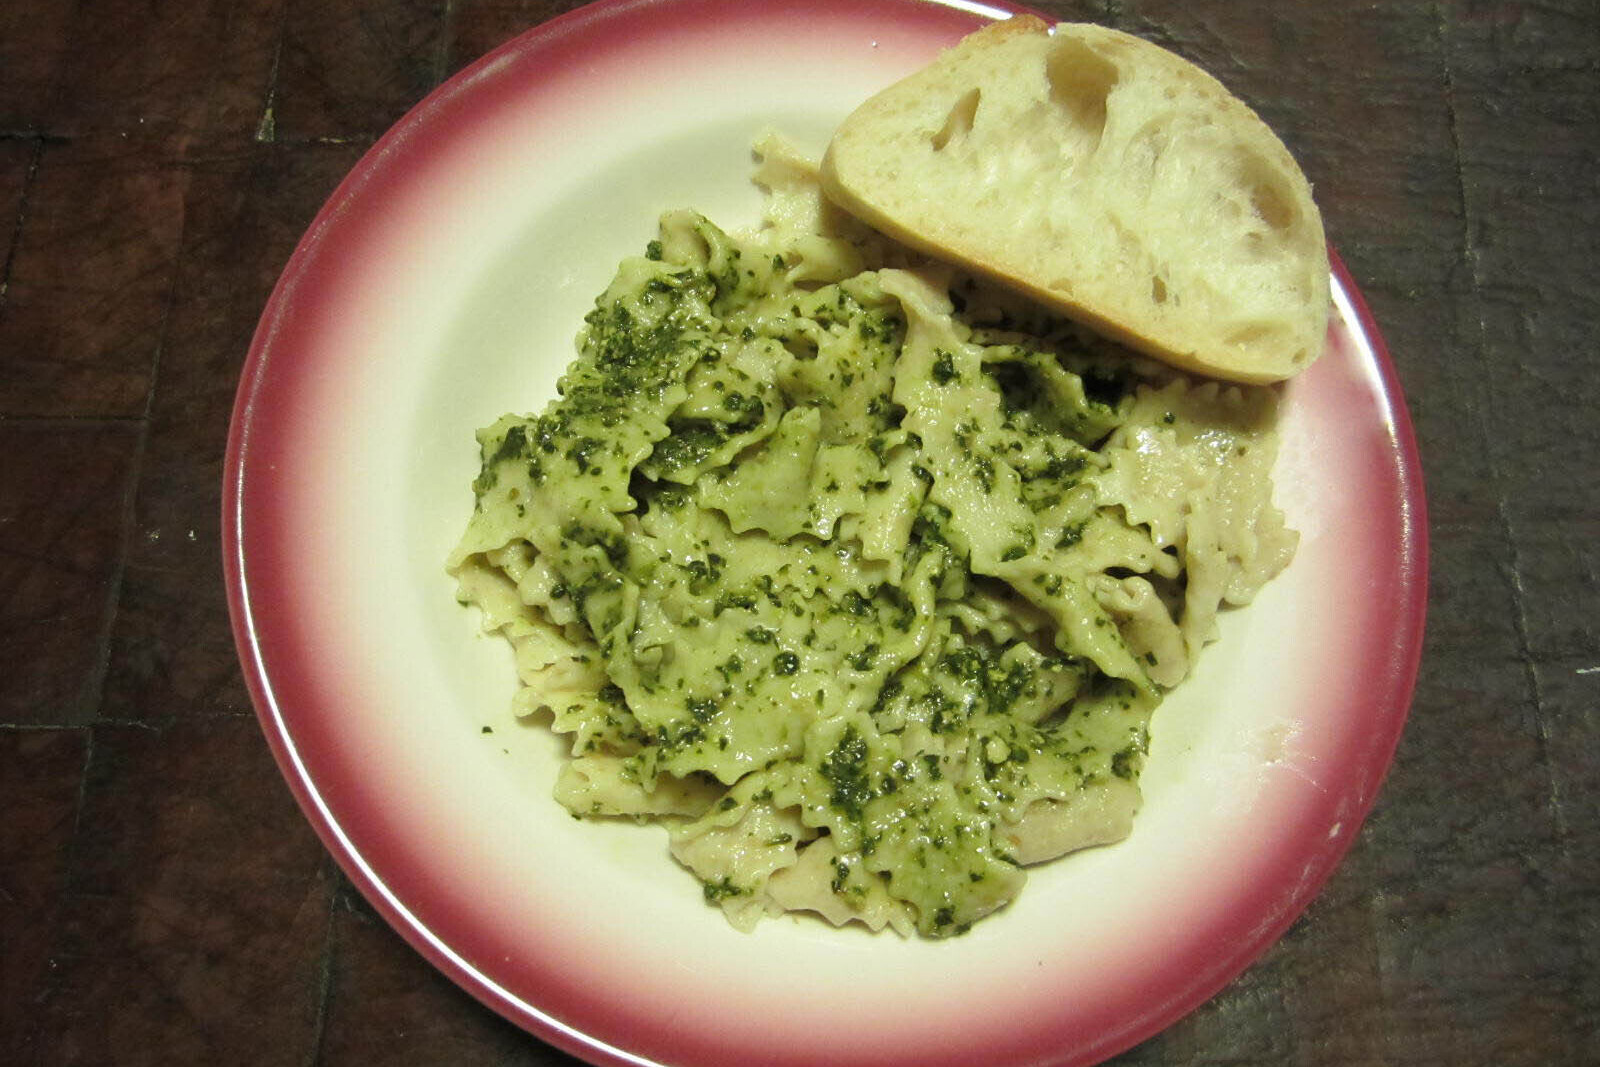 A plate of homemade fettuccine with pesto